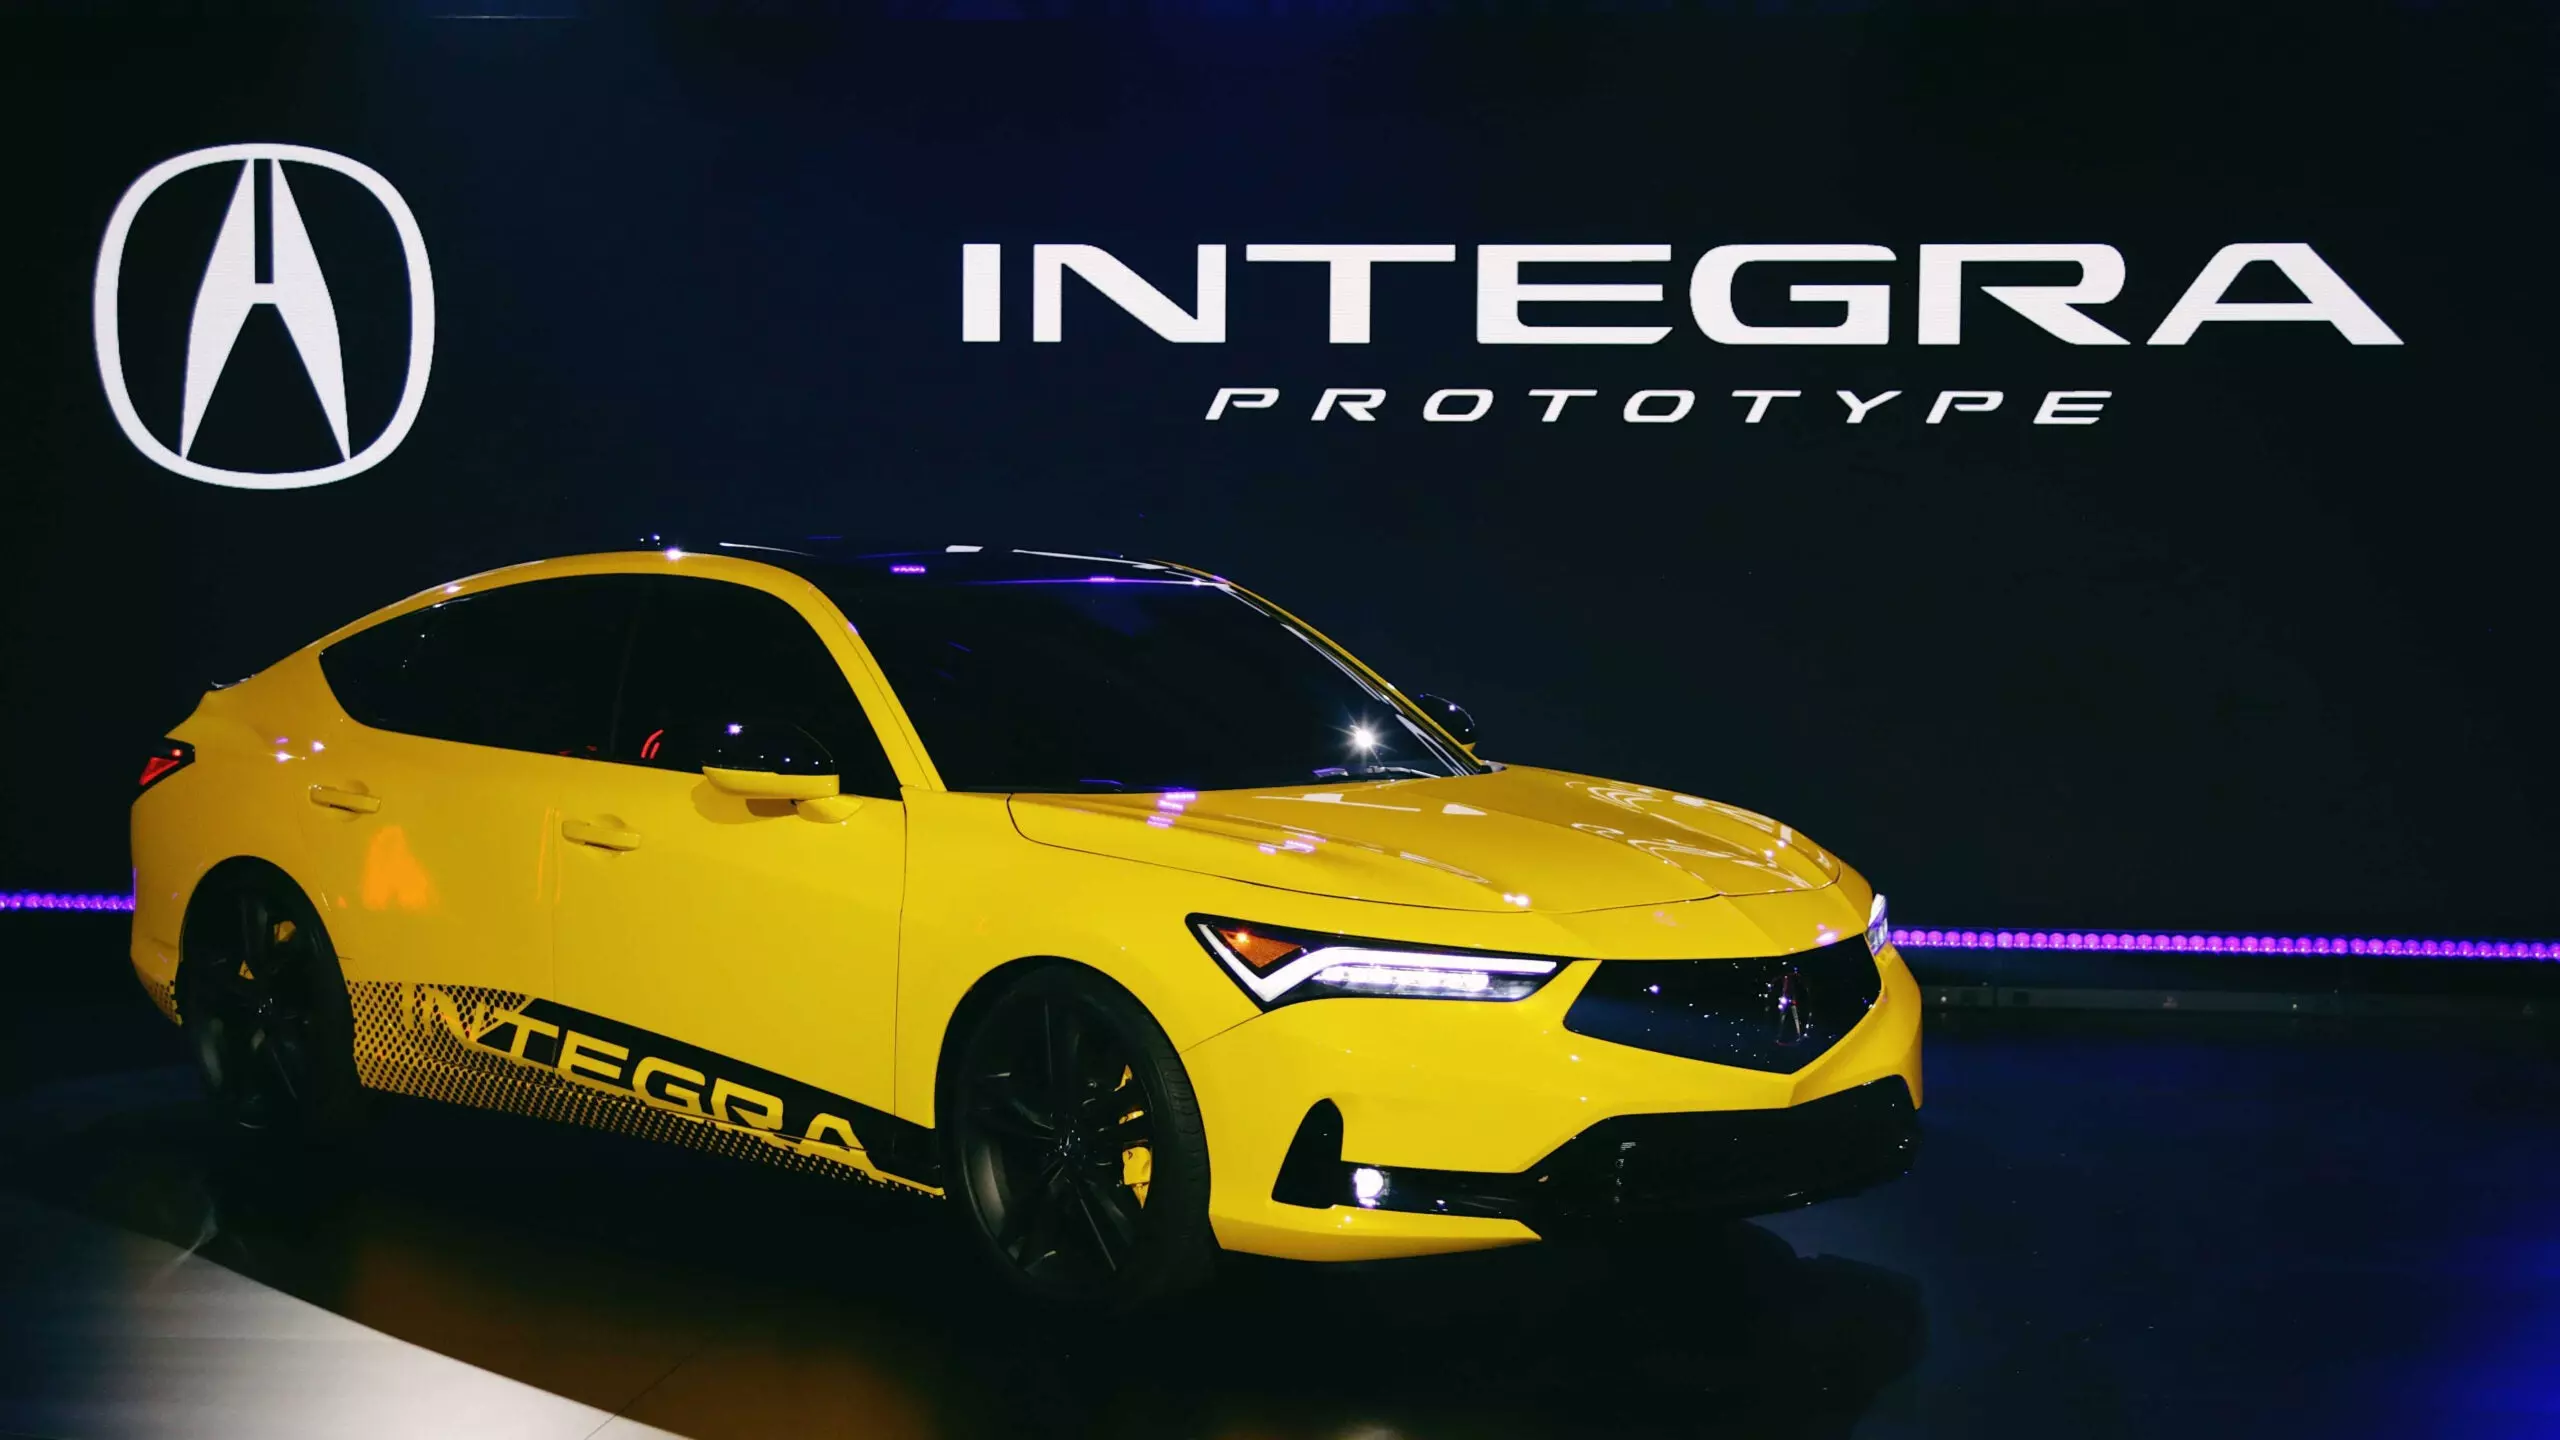 Acura Integra Prototype: My Main Takeaways After Seeing It in Person